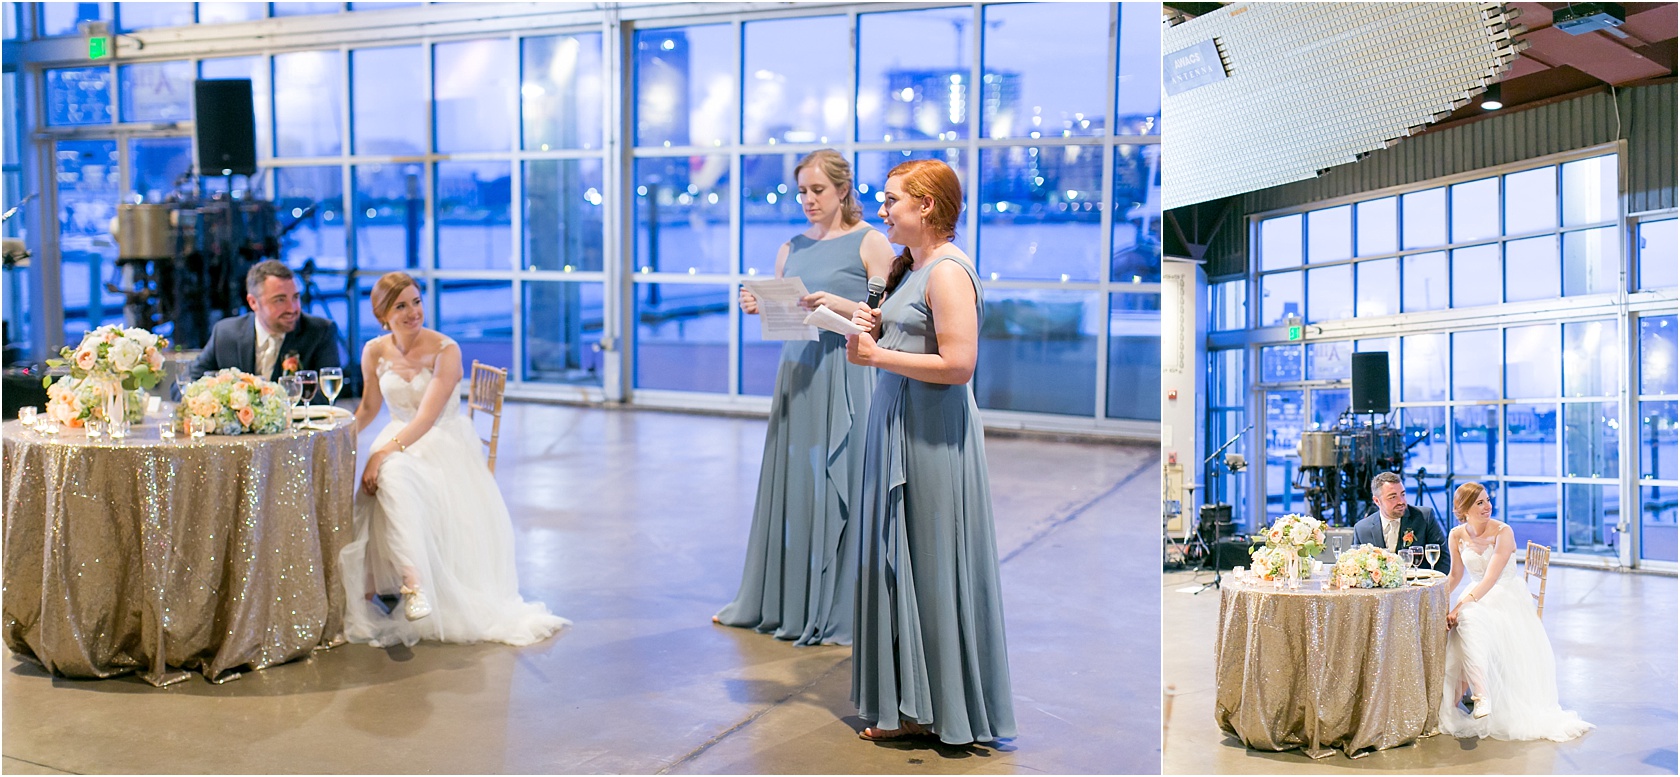 Rowland Baltimore Museum of Industry Wedding Living Radiant Photography photos_0145.jpg